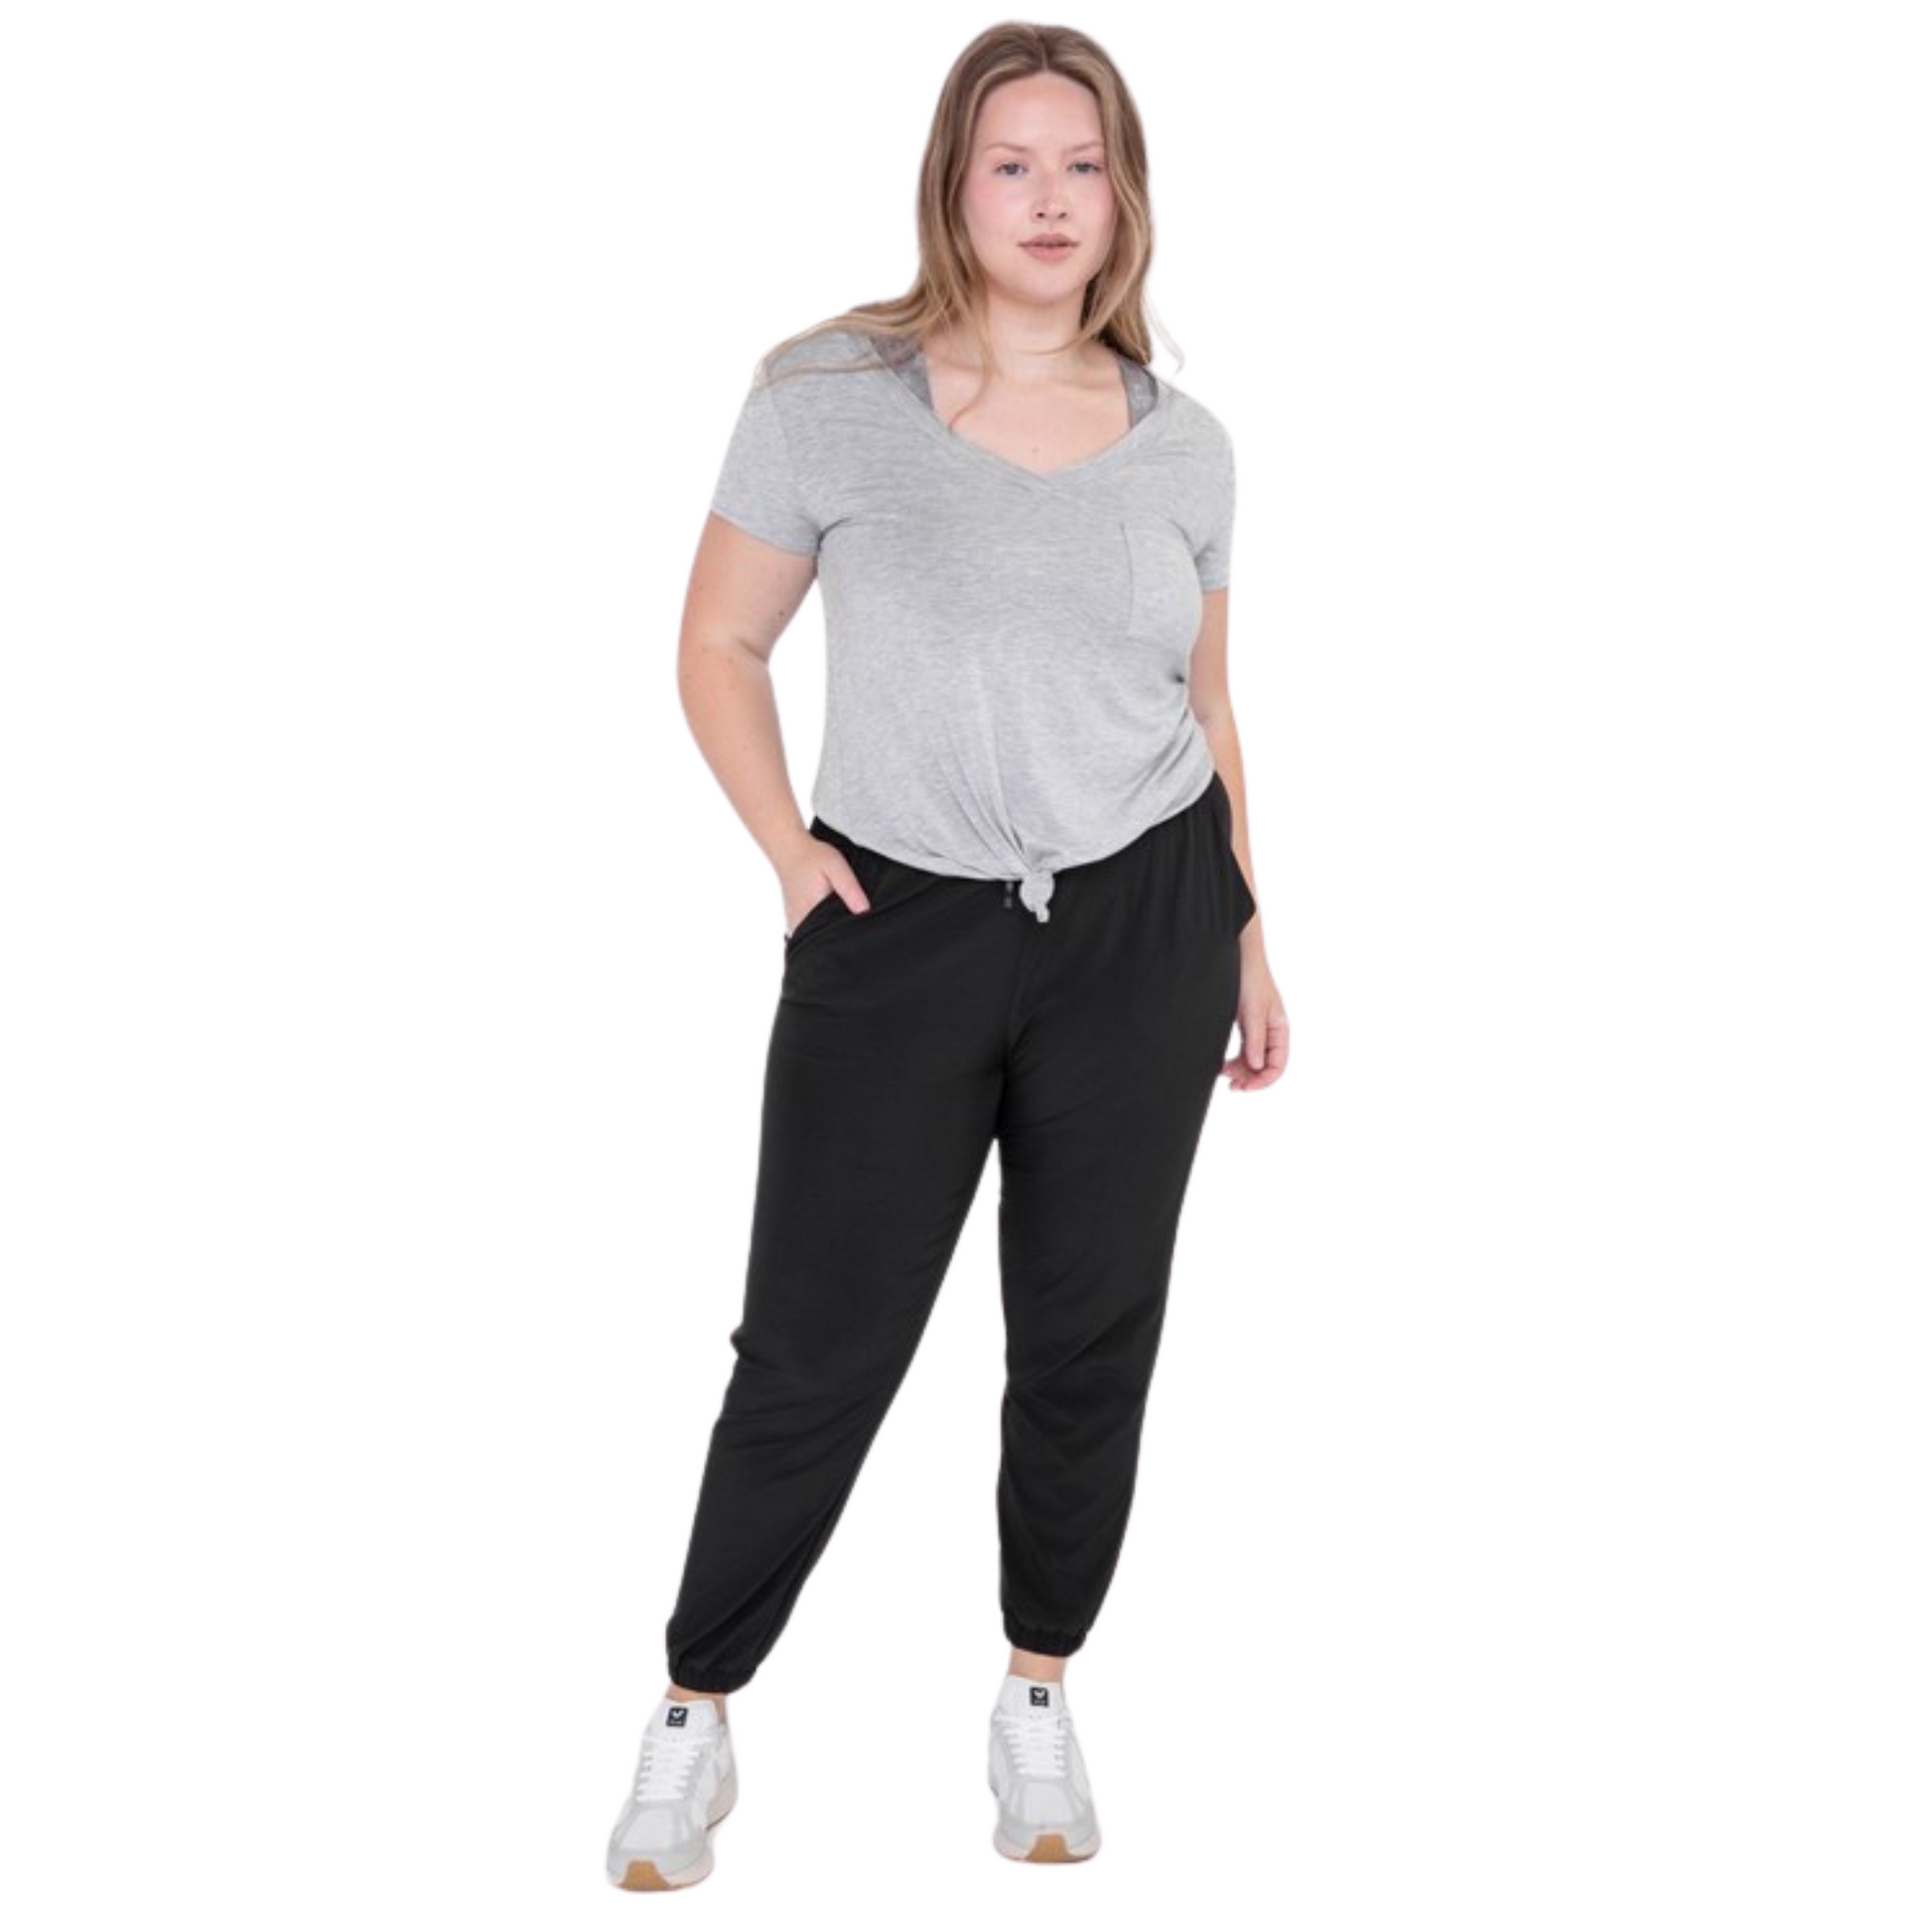 Be ready for your next adventure with these Curvy High Waisted Joggers. Crafted from premium fabric, they feature a high and elasticized waistband with drawstring closure, slanted pockets, and 7/8 length with cuffed ankles for a stylish look. Available in classic black color.